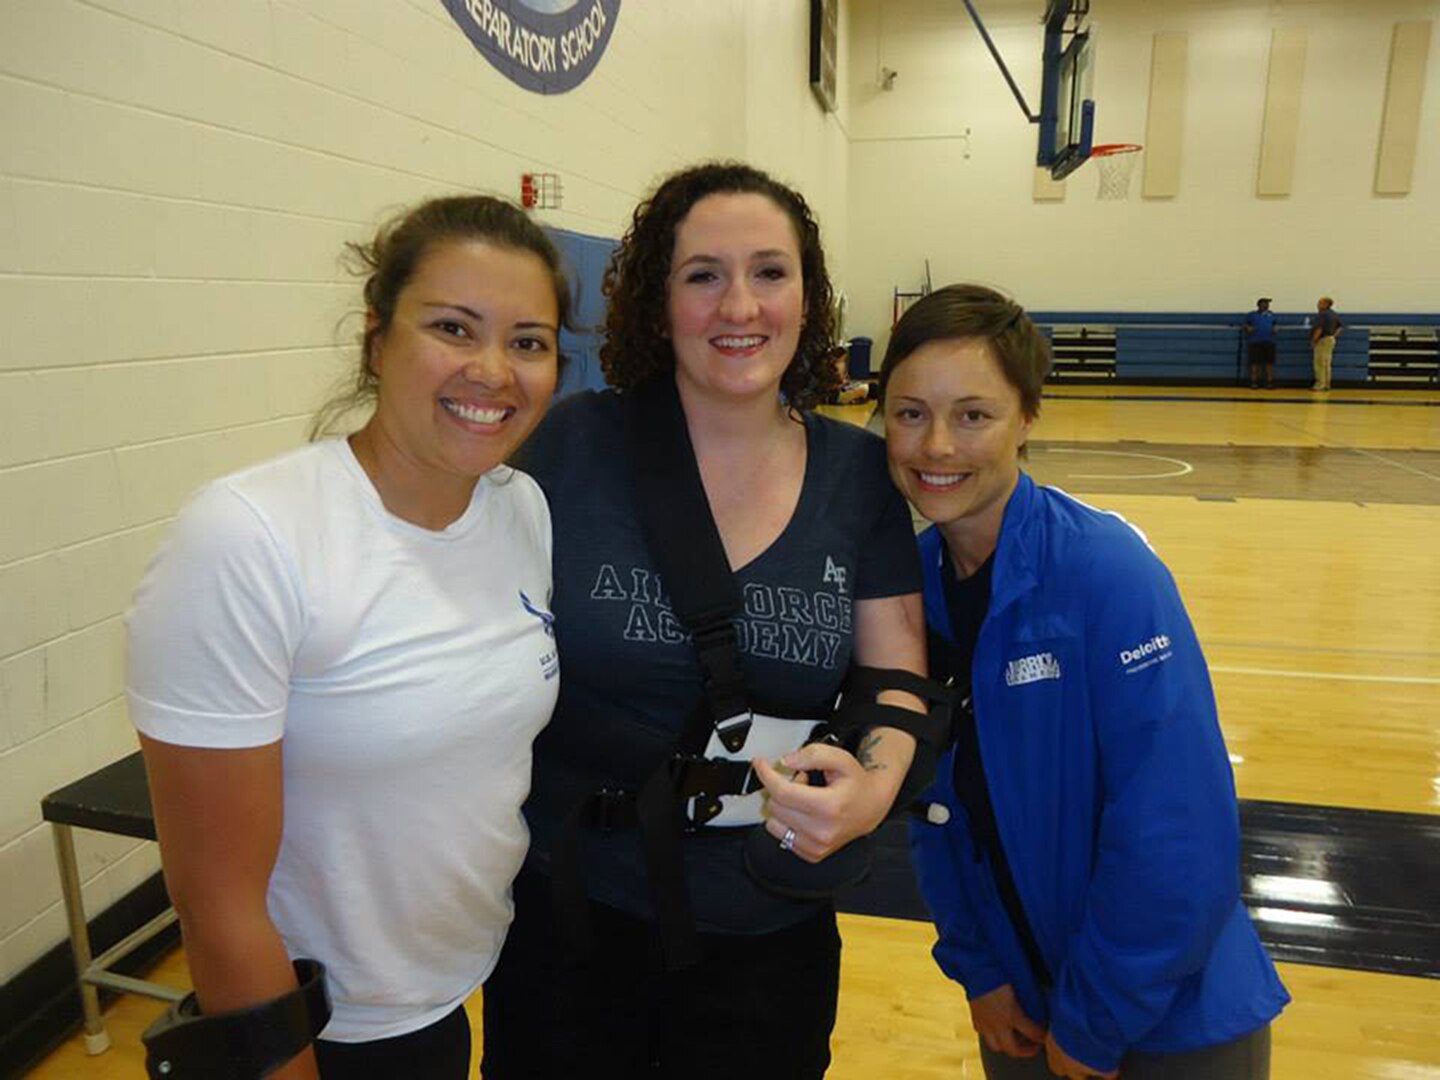 PSNS & IMF employee Adrienne Rank (center) visits fellow Warrior Game athletes and cancer survivors Sarah Evan (left) and Laura McClosky.